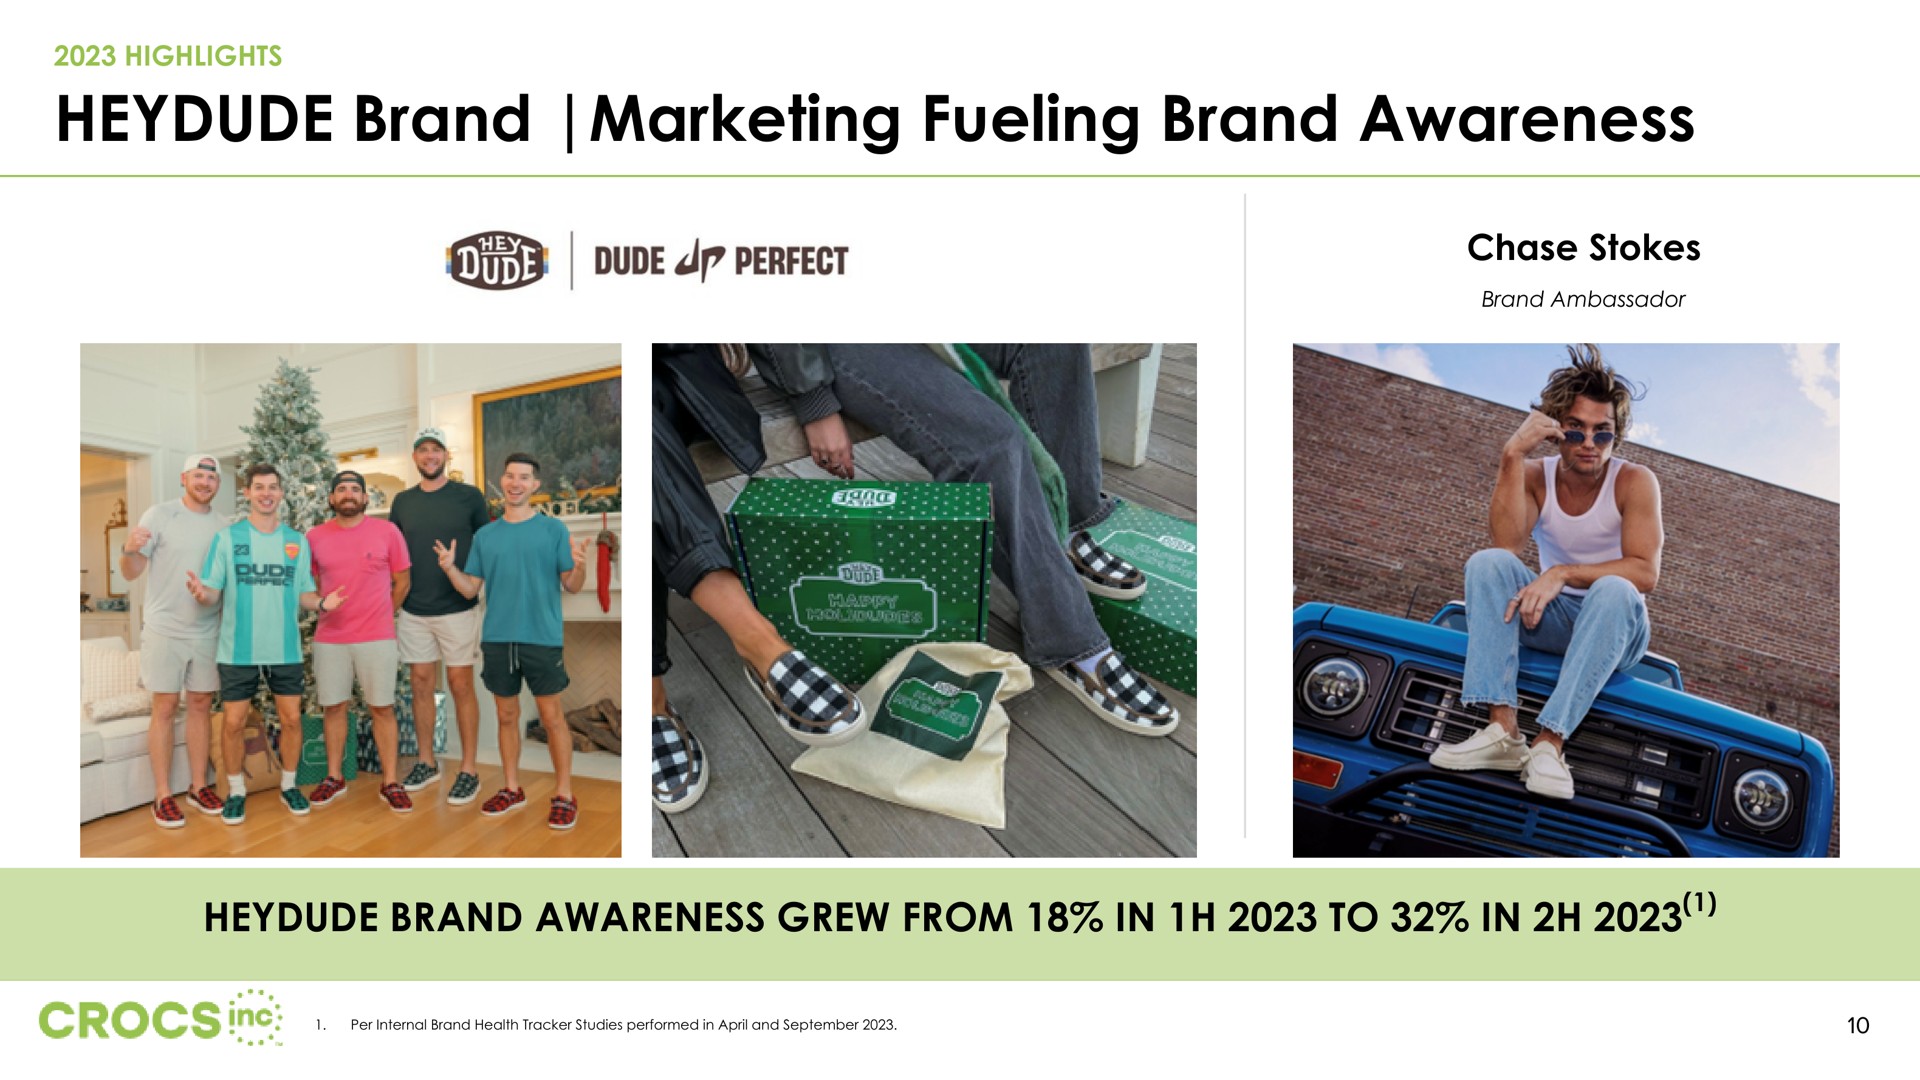 brand marketing fueling brand awareness dude perfect chase stokes | Crocs